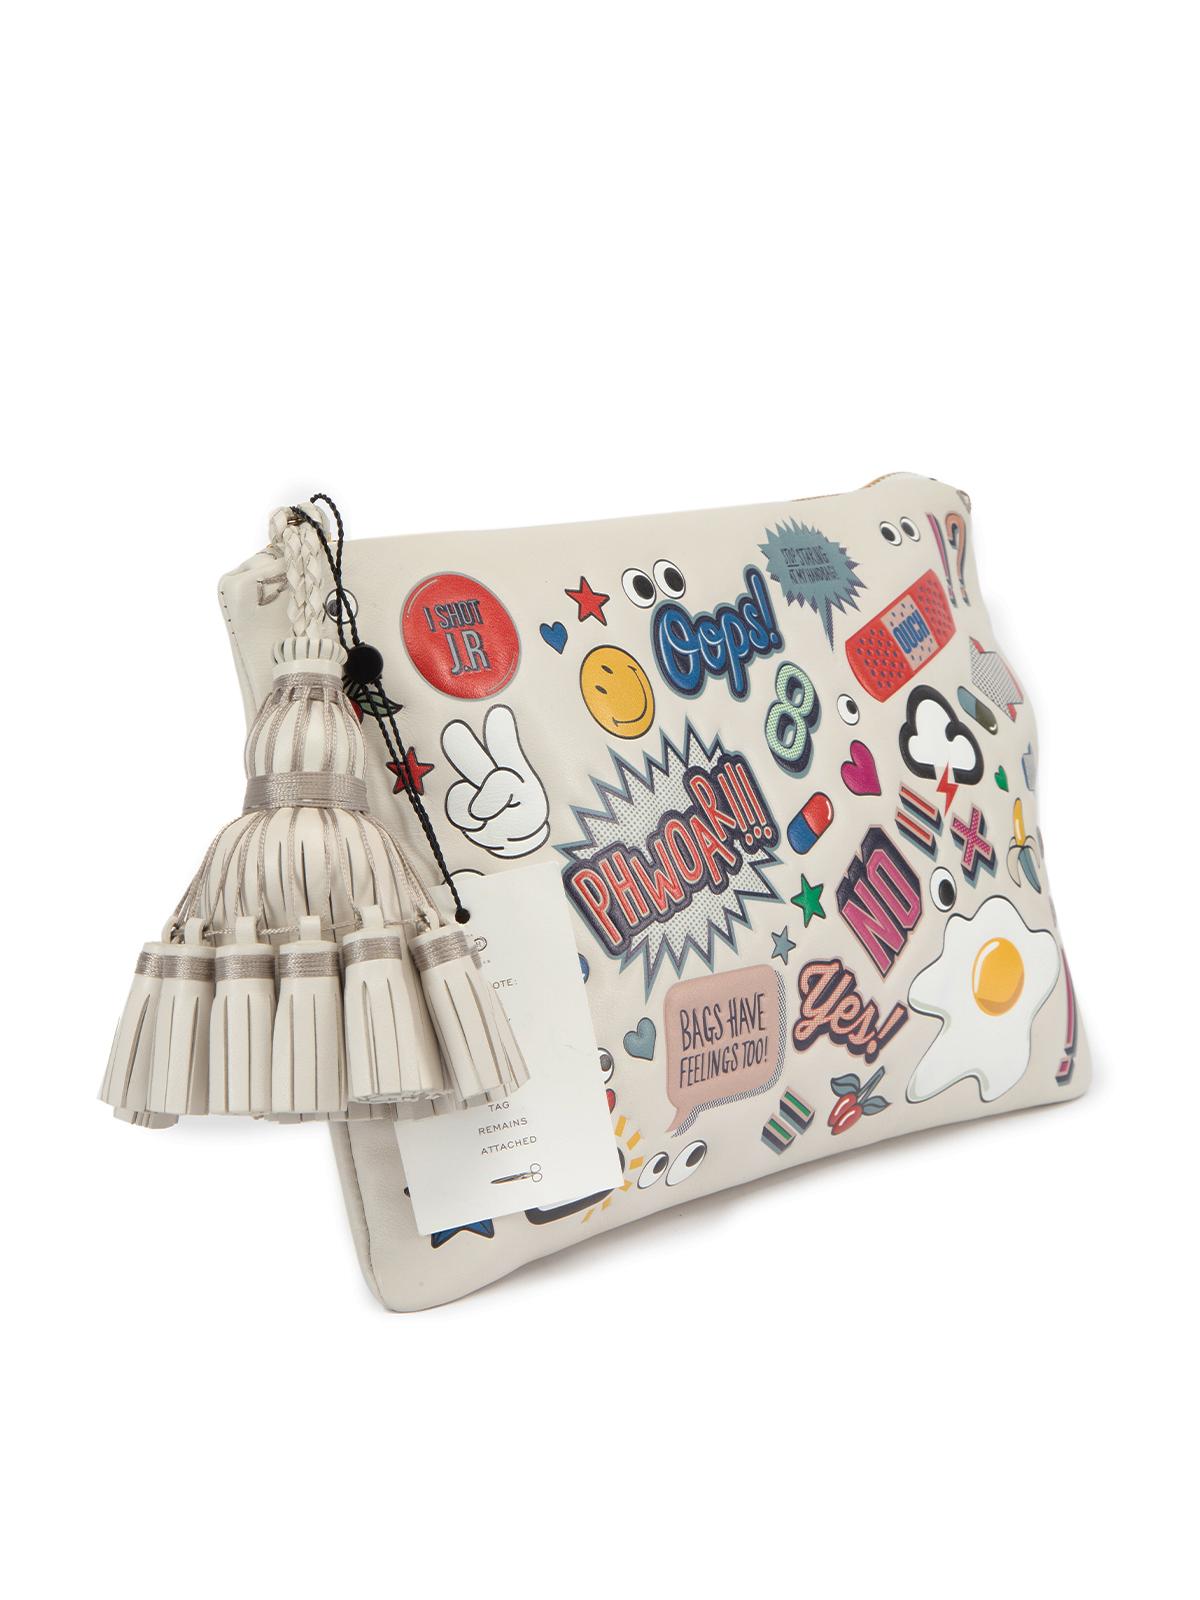 CONDITION is Never worn with tags. No visible wear to bag is evident on this new Anya Hindmarch designer resale item. This item comes with original box and dust bag. Details Cream Leather Clutch Zip fastening Braided tassels zipper pull Graphic